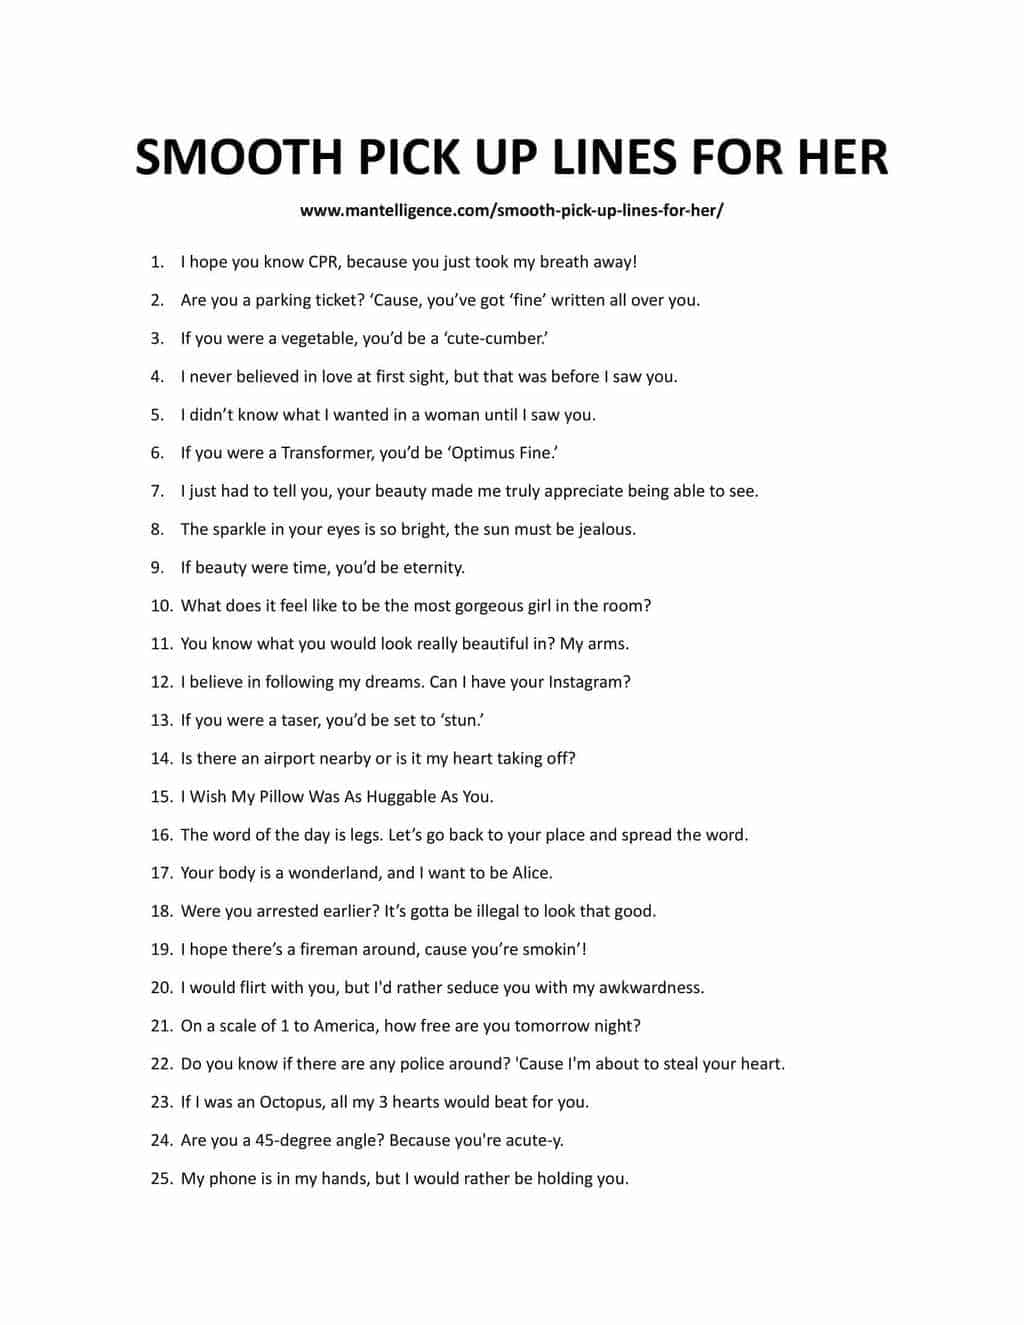 Downloadable and Printable list of pick up lines